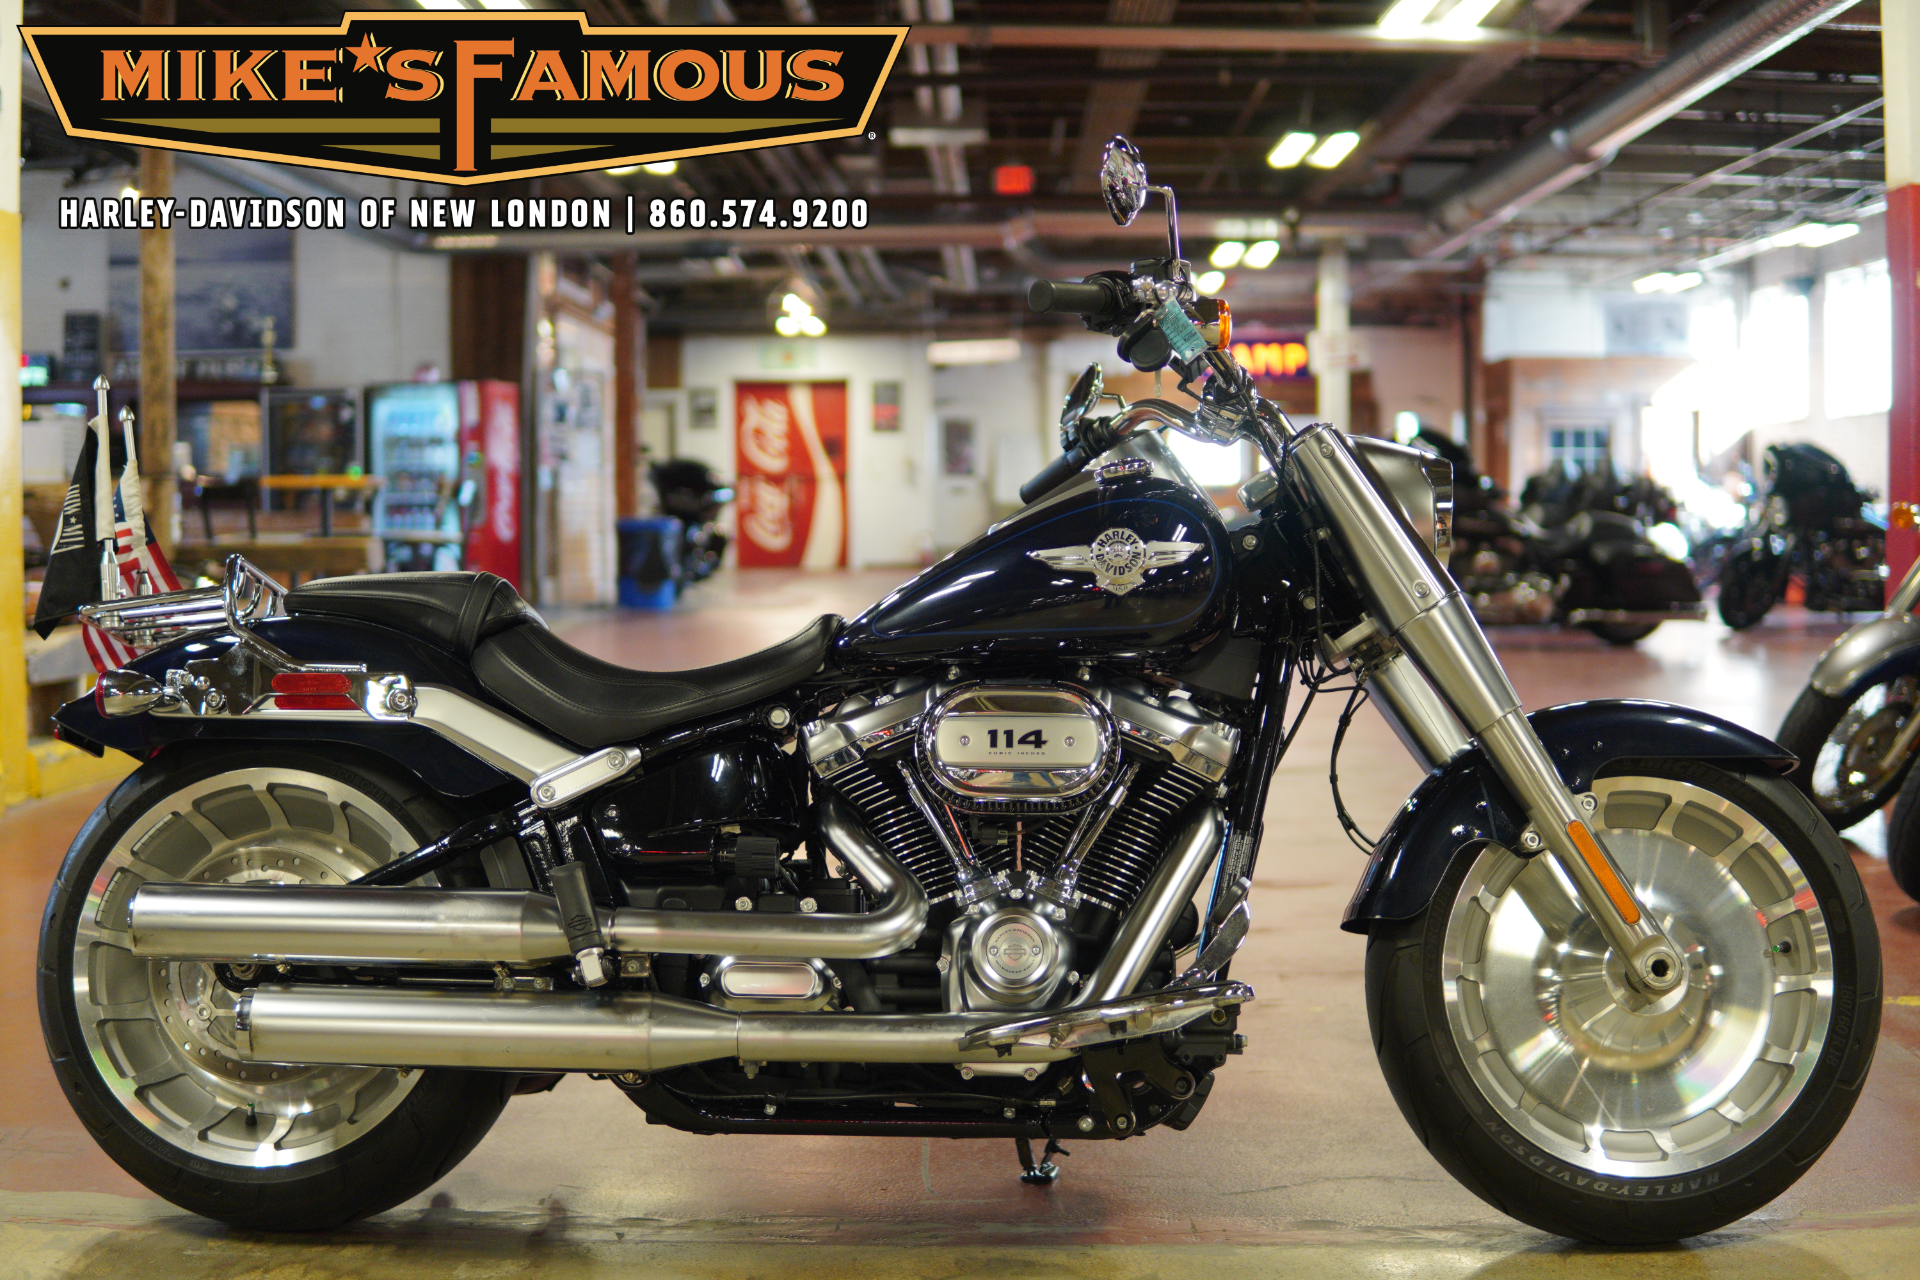 Used 2019 Harley Davidson Fat Boy 114 Midnight Blue Motorcycles In New London Ct T52821